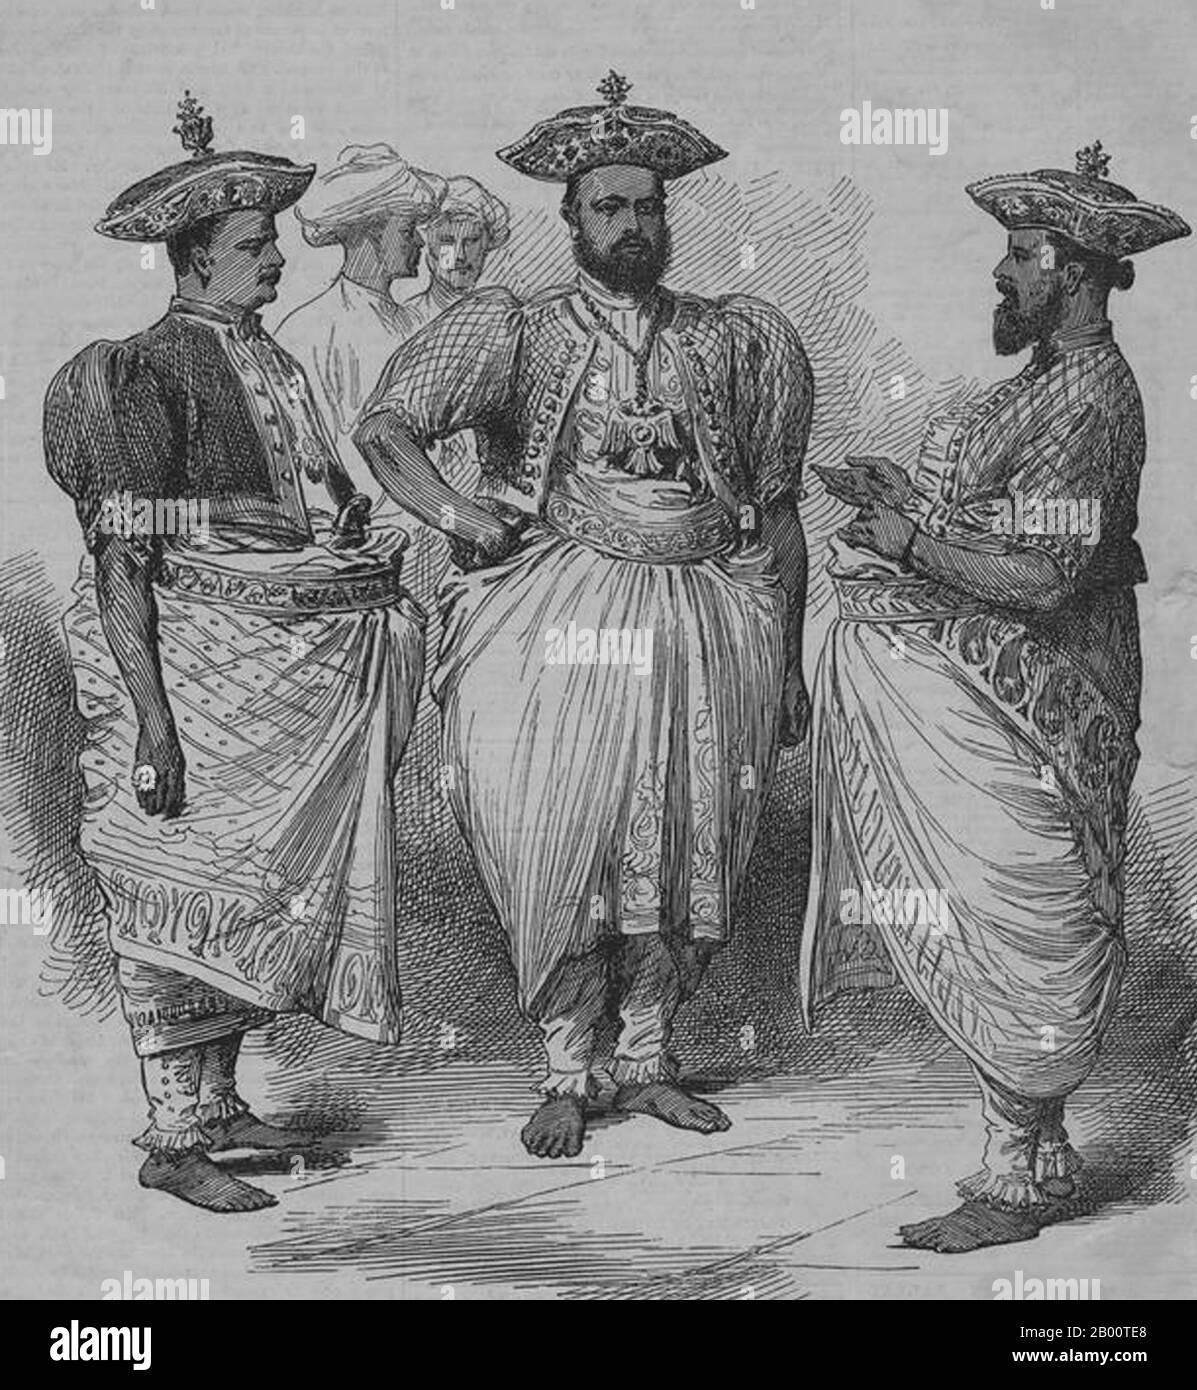 Sri  Lanka: Kandyan chiefs or Radala waiting to meet the Prince of Wales, Kandy, 1876.  In 1592 Kandy became the capital city of the last remaining independent kingdom in Sri Lanka after the coastal regions had been conquered by the Portuguese. Kandy stayed independent until the early 19th century. In the Second Kandyan War, the British met no resistance and reached the city on February 10, 1815. On March 2, 1815, a treaty known as the Kandyan Convention was signed between the British and the Radalas (Kandyan aristocrats). With this treaty, Kandy became a British protectorate. Stock Photo